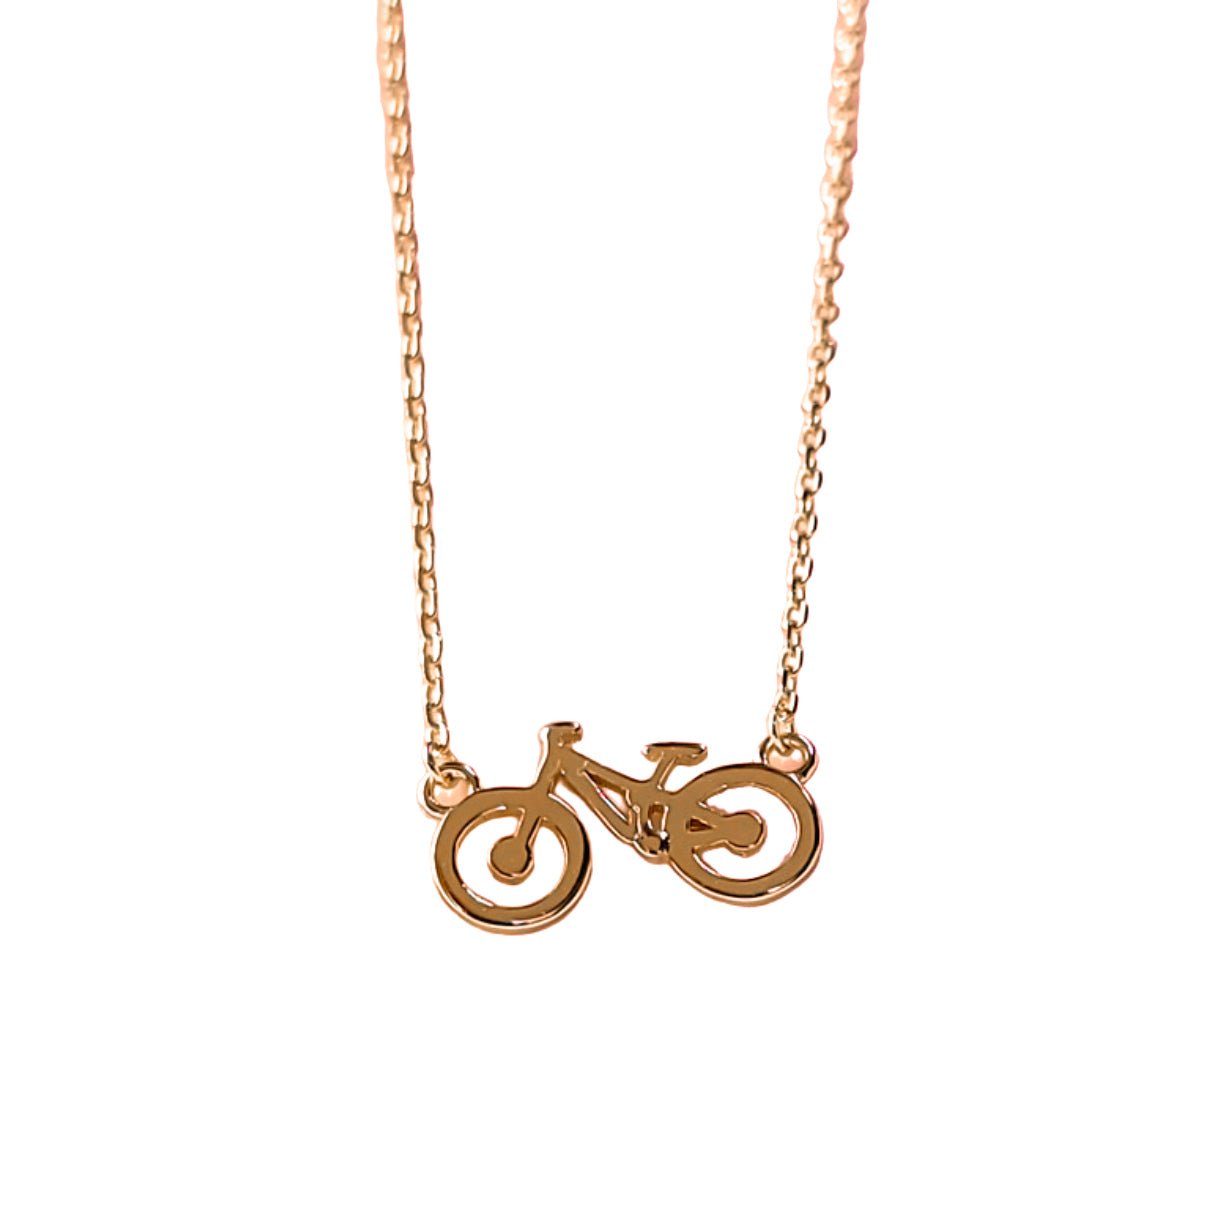 18k rose gold  bike necklace with adjustable gold chain. mountain bike inspired necklace